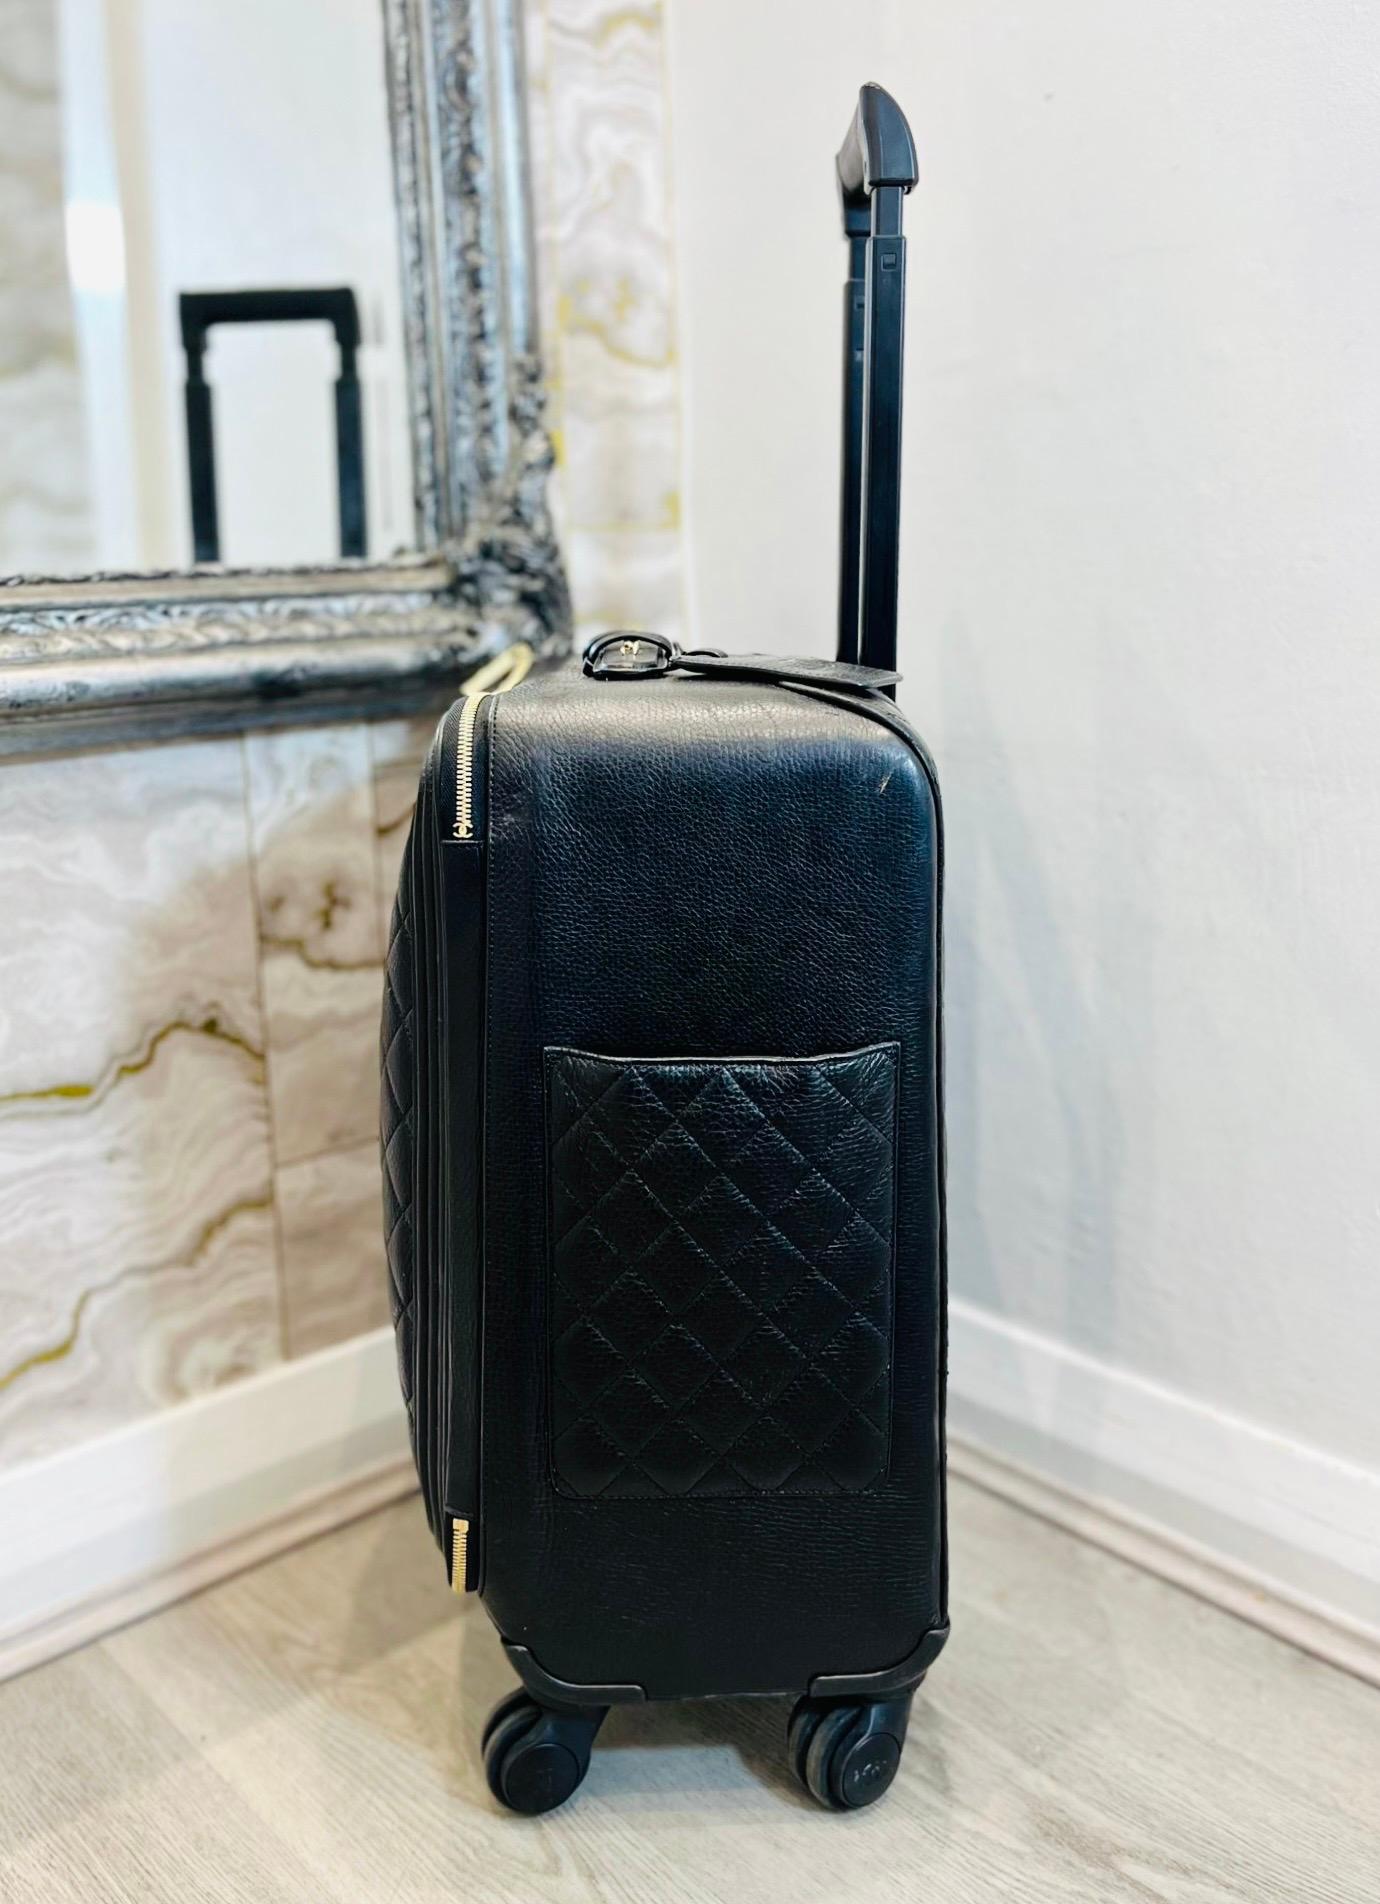 Chanel Caviar Quilted Leather Coco Suitcase In Good Condition For Sale In London, GB